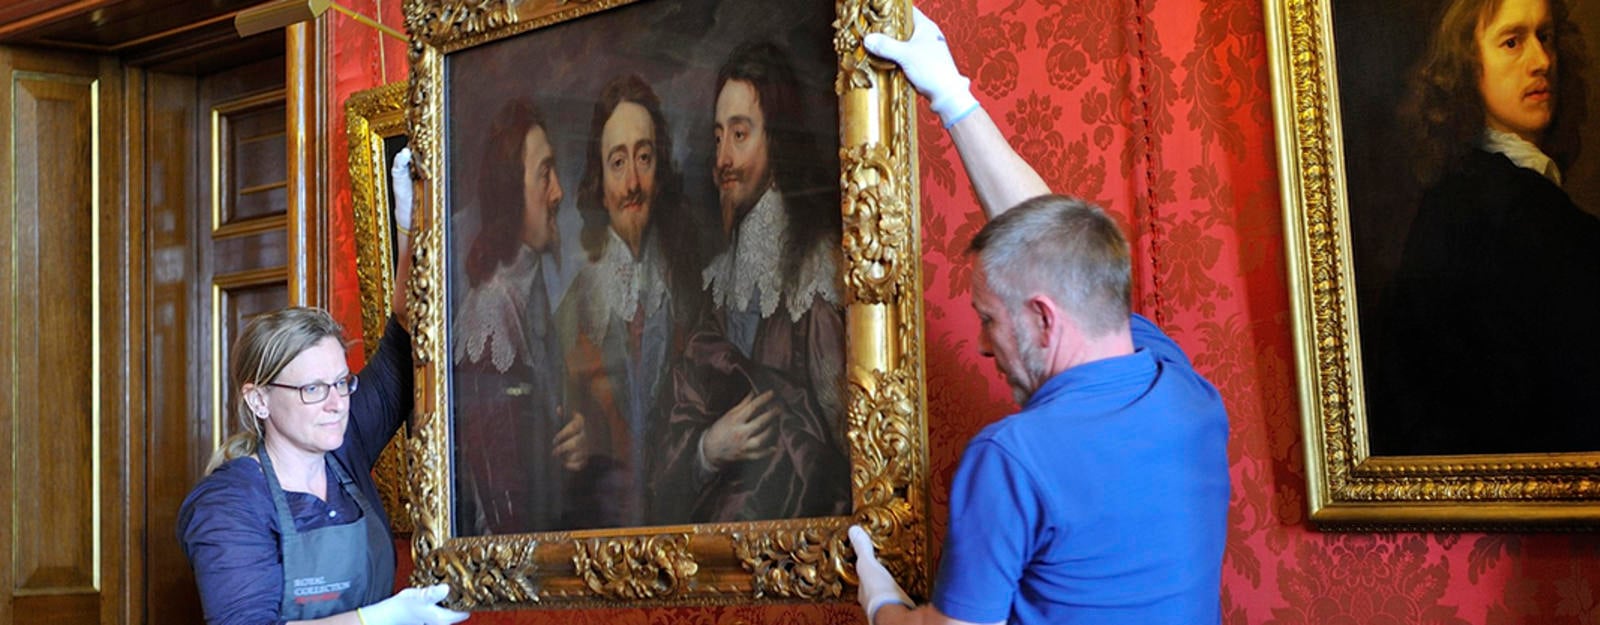 Painting being  moved by art handlers